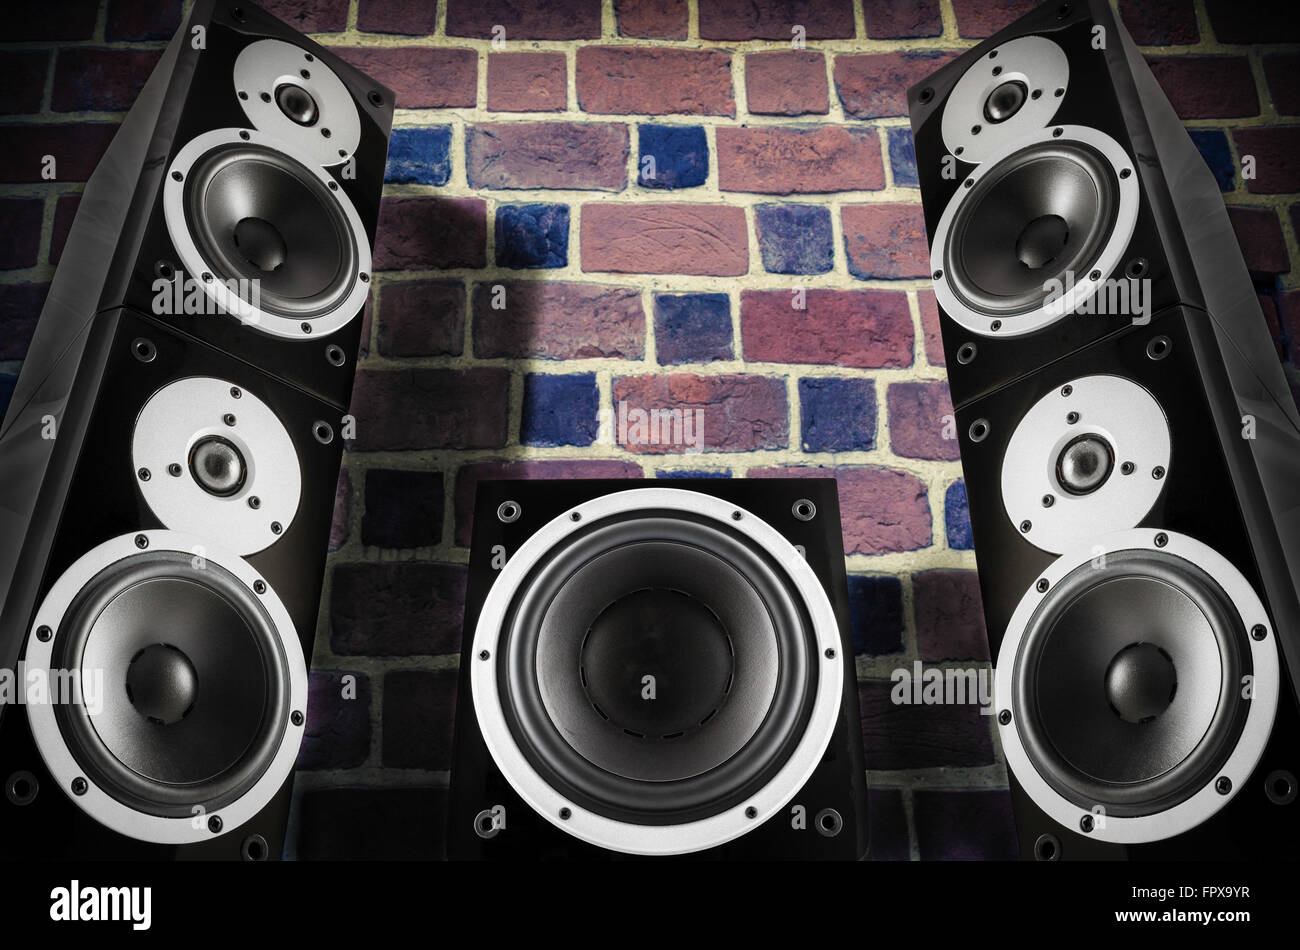 Black music speakers against brick wall background Stock Photo - Alamy